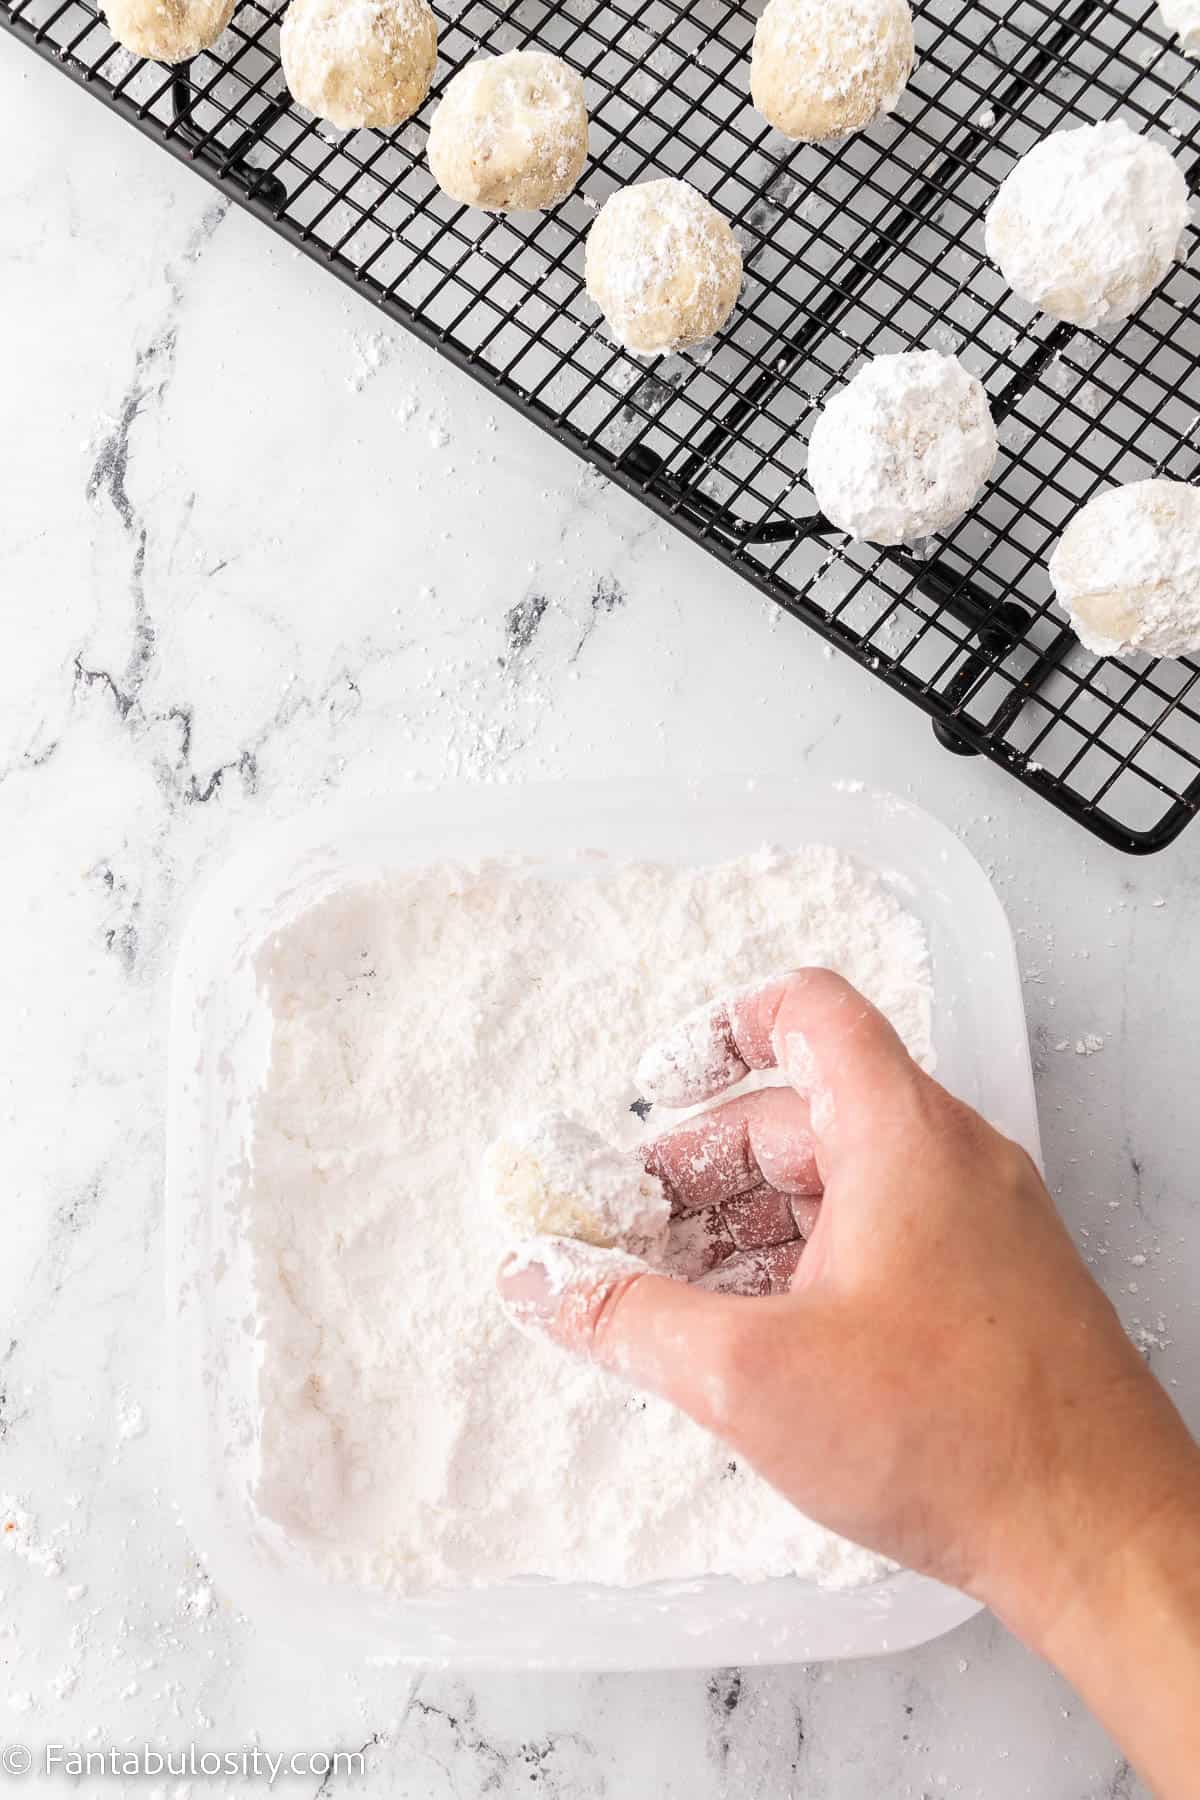 A hand holding a pecan snowball cookie is rolling it in powdered sugar while a wire rack in the background holds additional cookies that are in various stages of coating